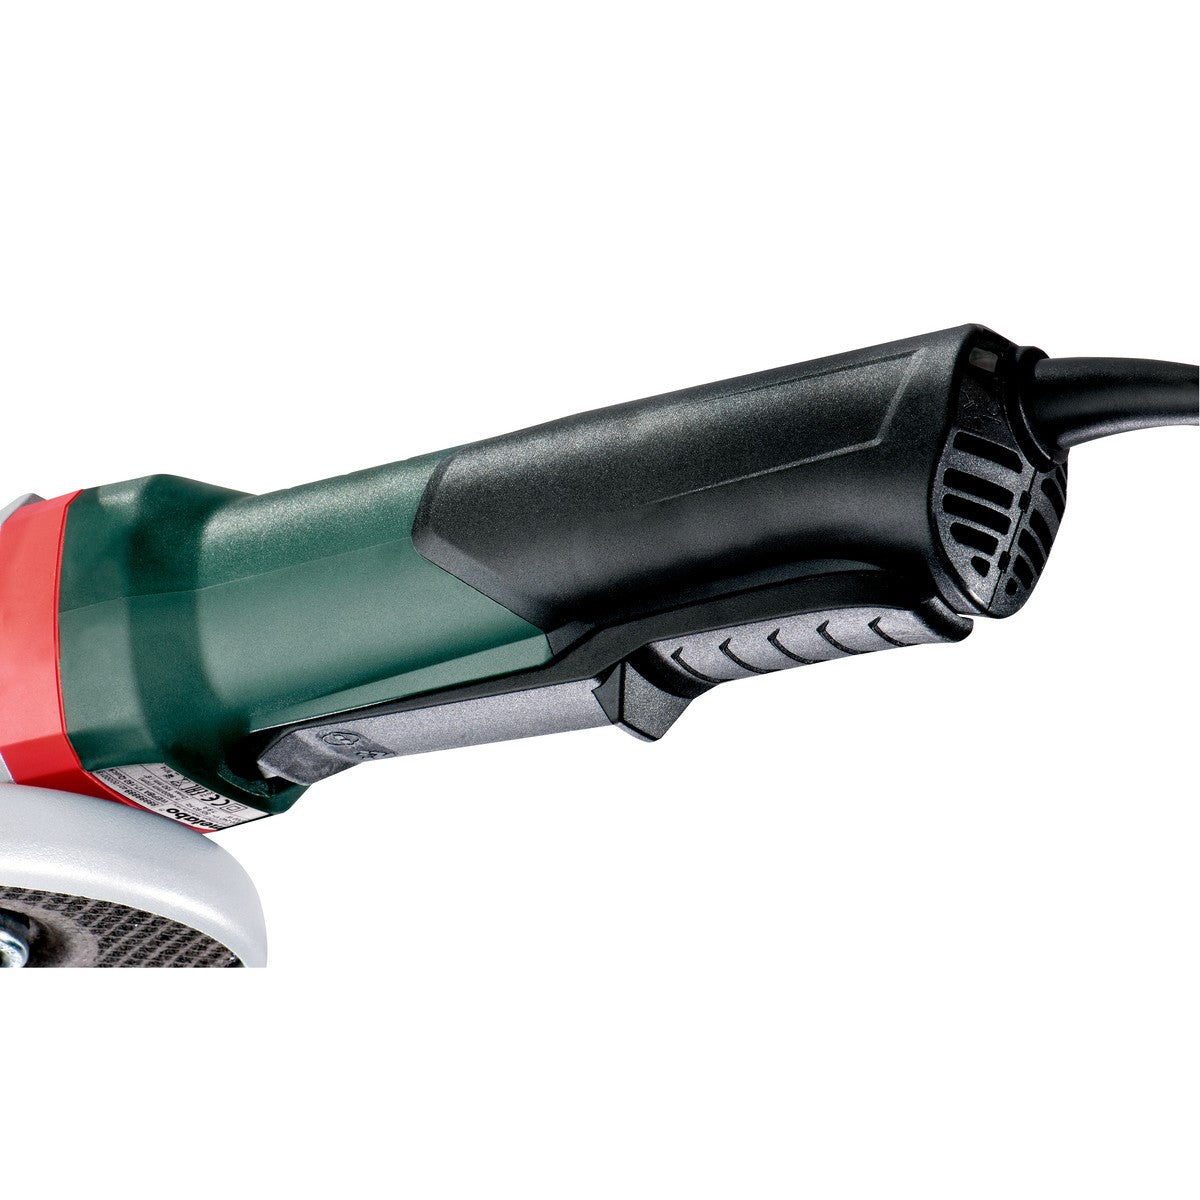 Metabo (600437420) 5 inch Angle Grinder w NonLock Paddle Switch Brake & Drop Secure image 6 of 6